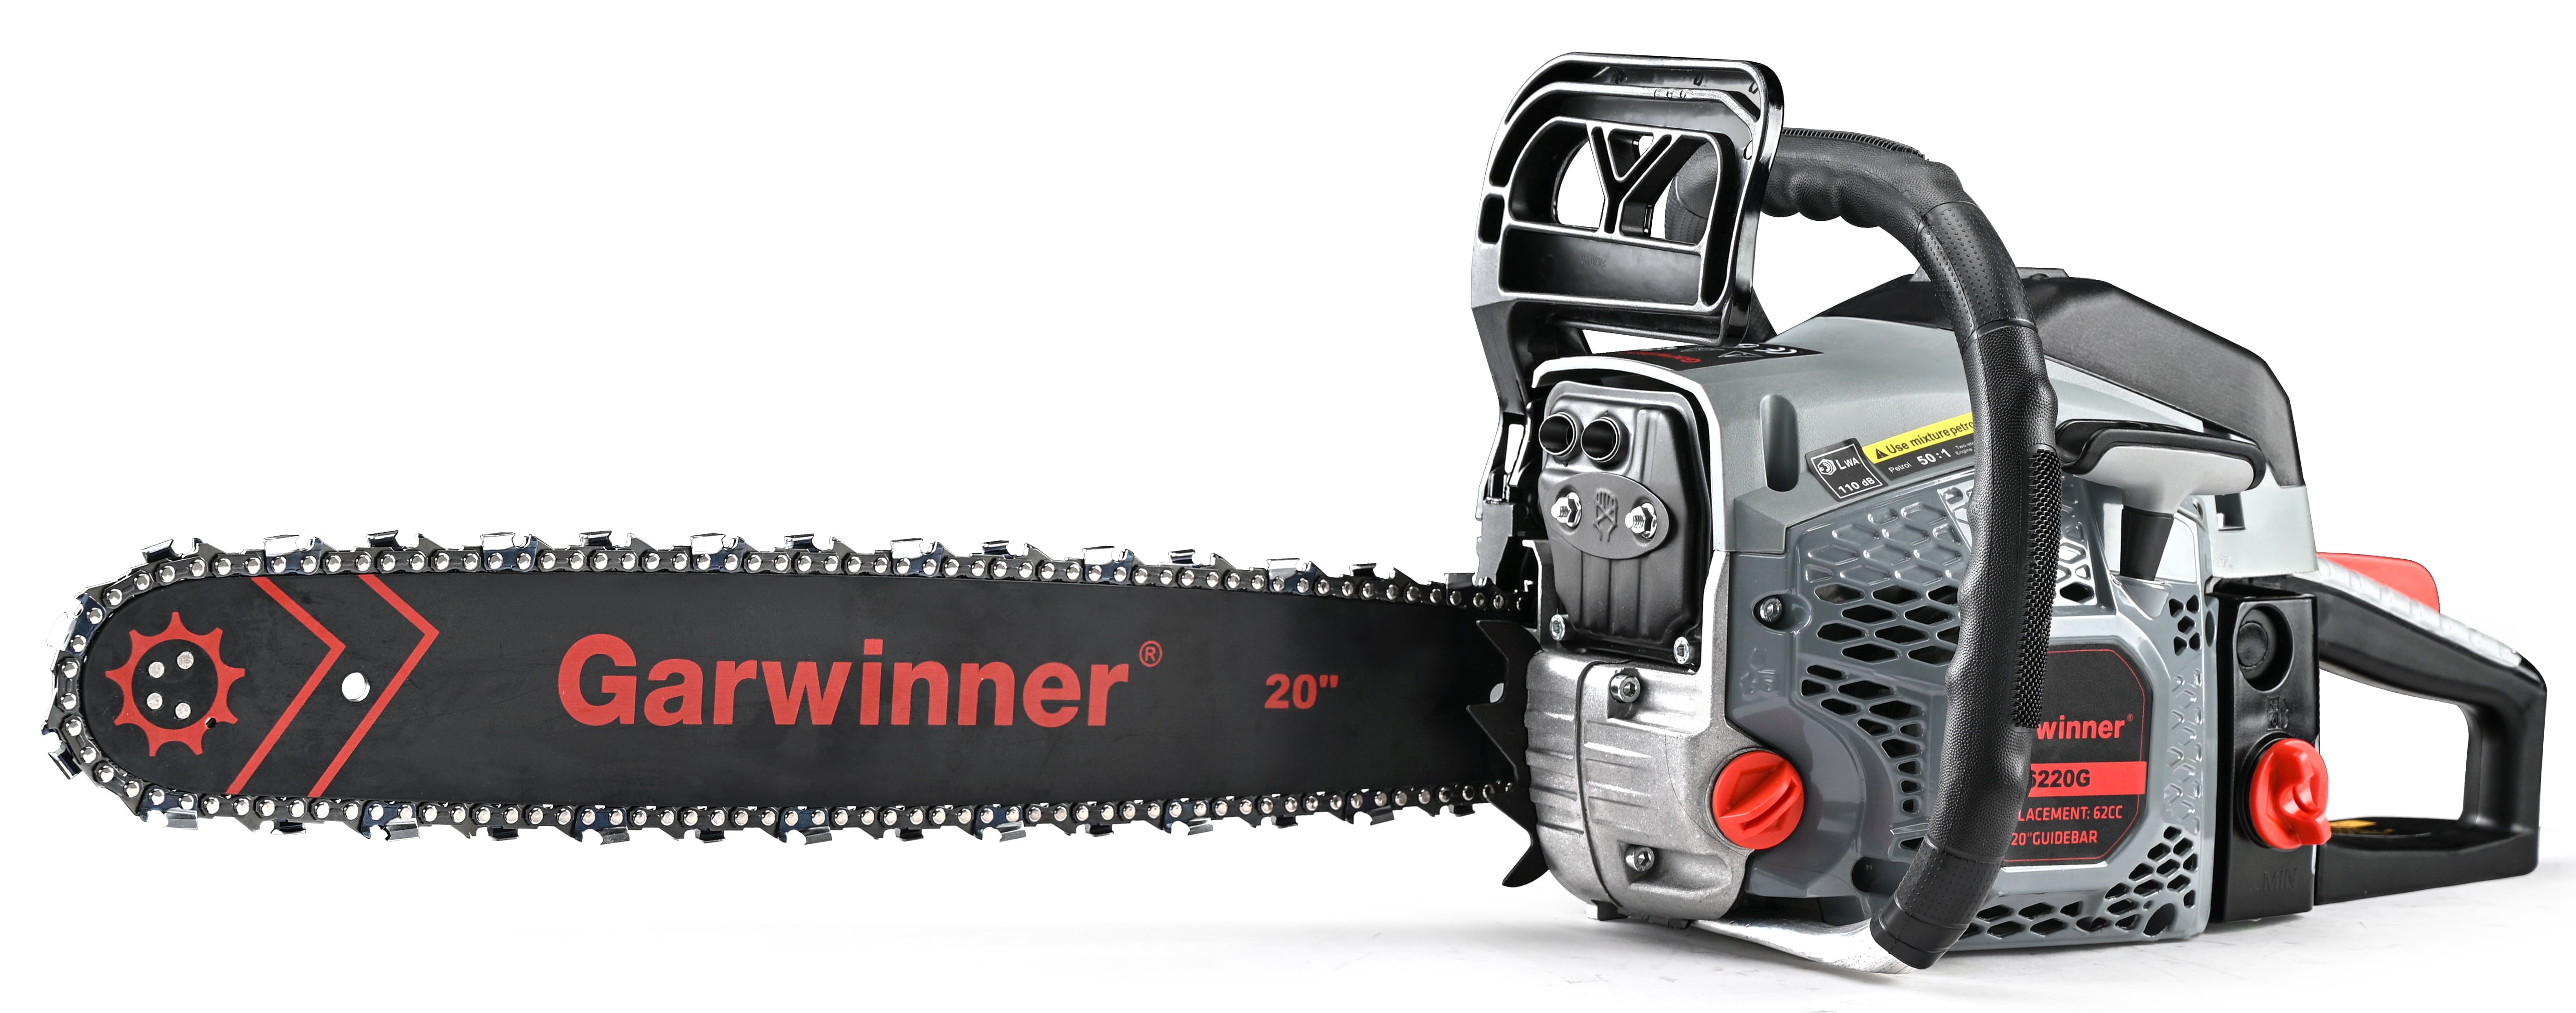 Garwinner Gas Chainsaw 20'' 2-Stroke 62CC Cordless Chainsaw 6220G for Farm, Garden and Ranch for Cutting Wood - image 1 of 7